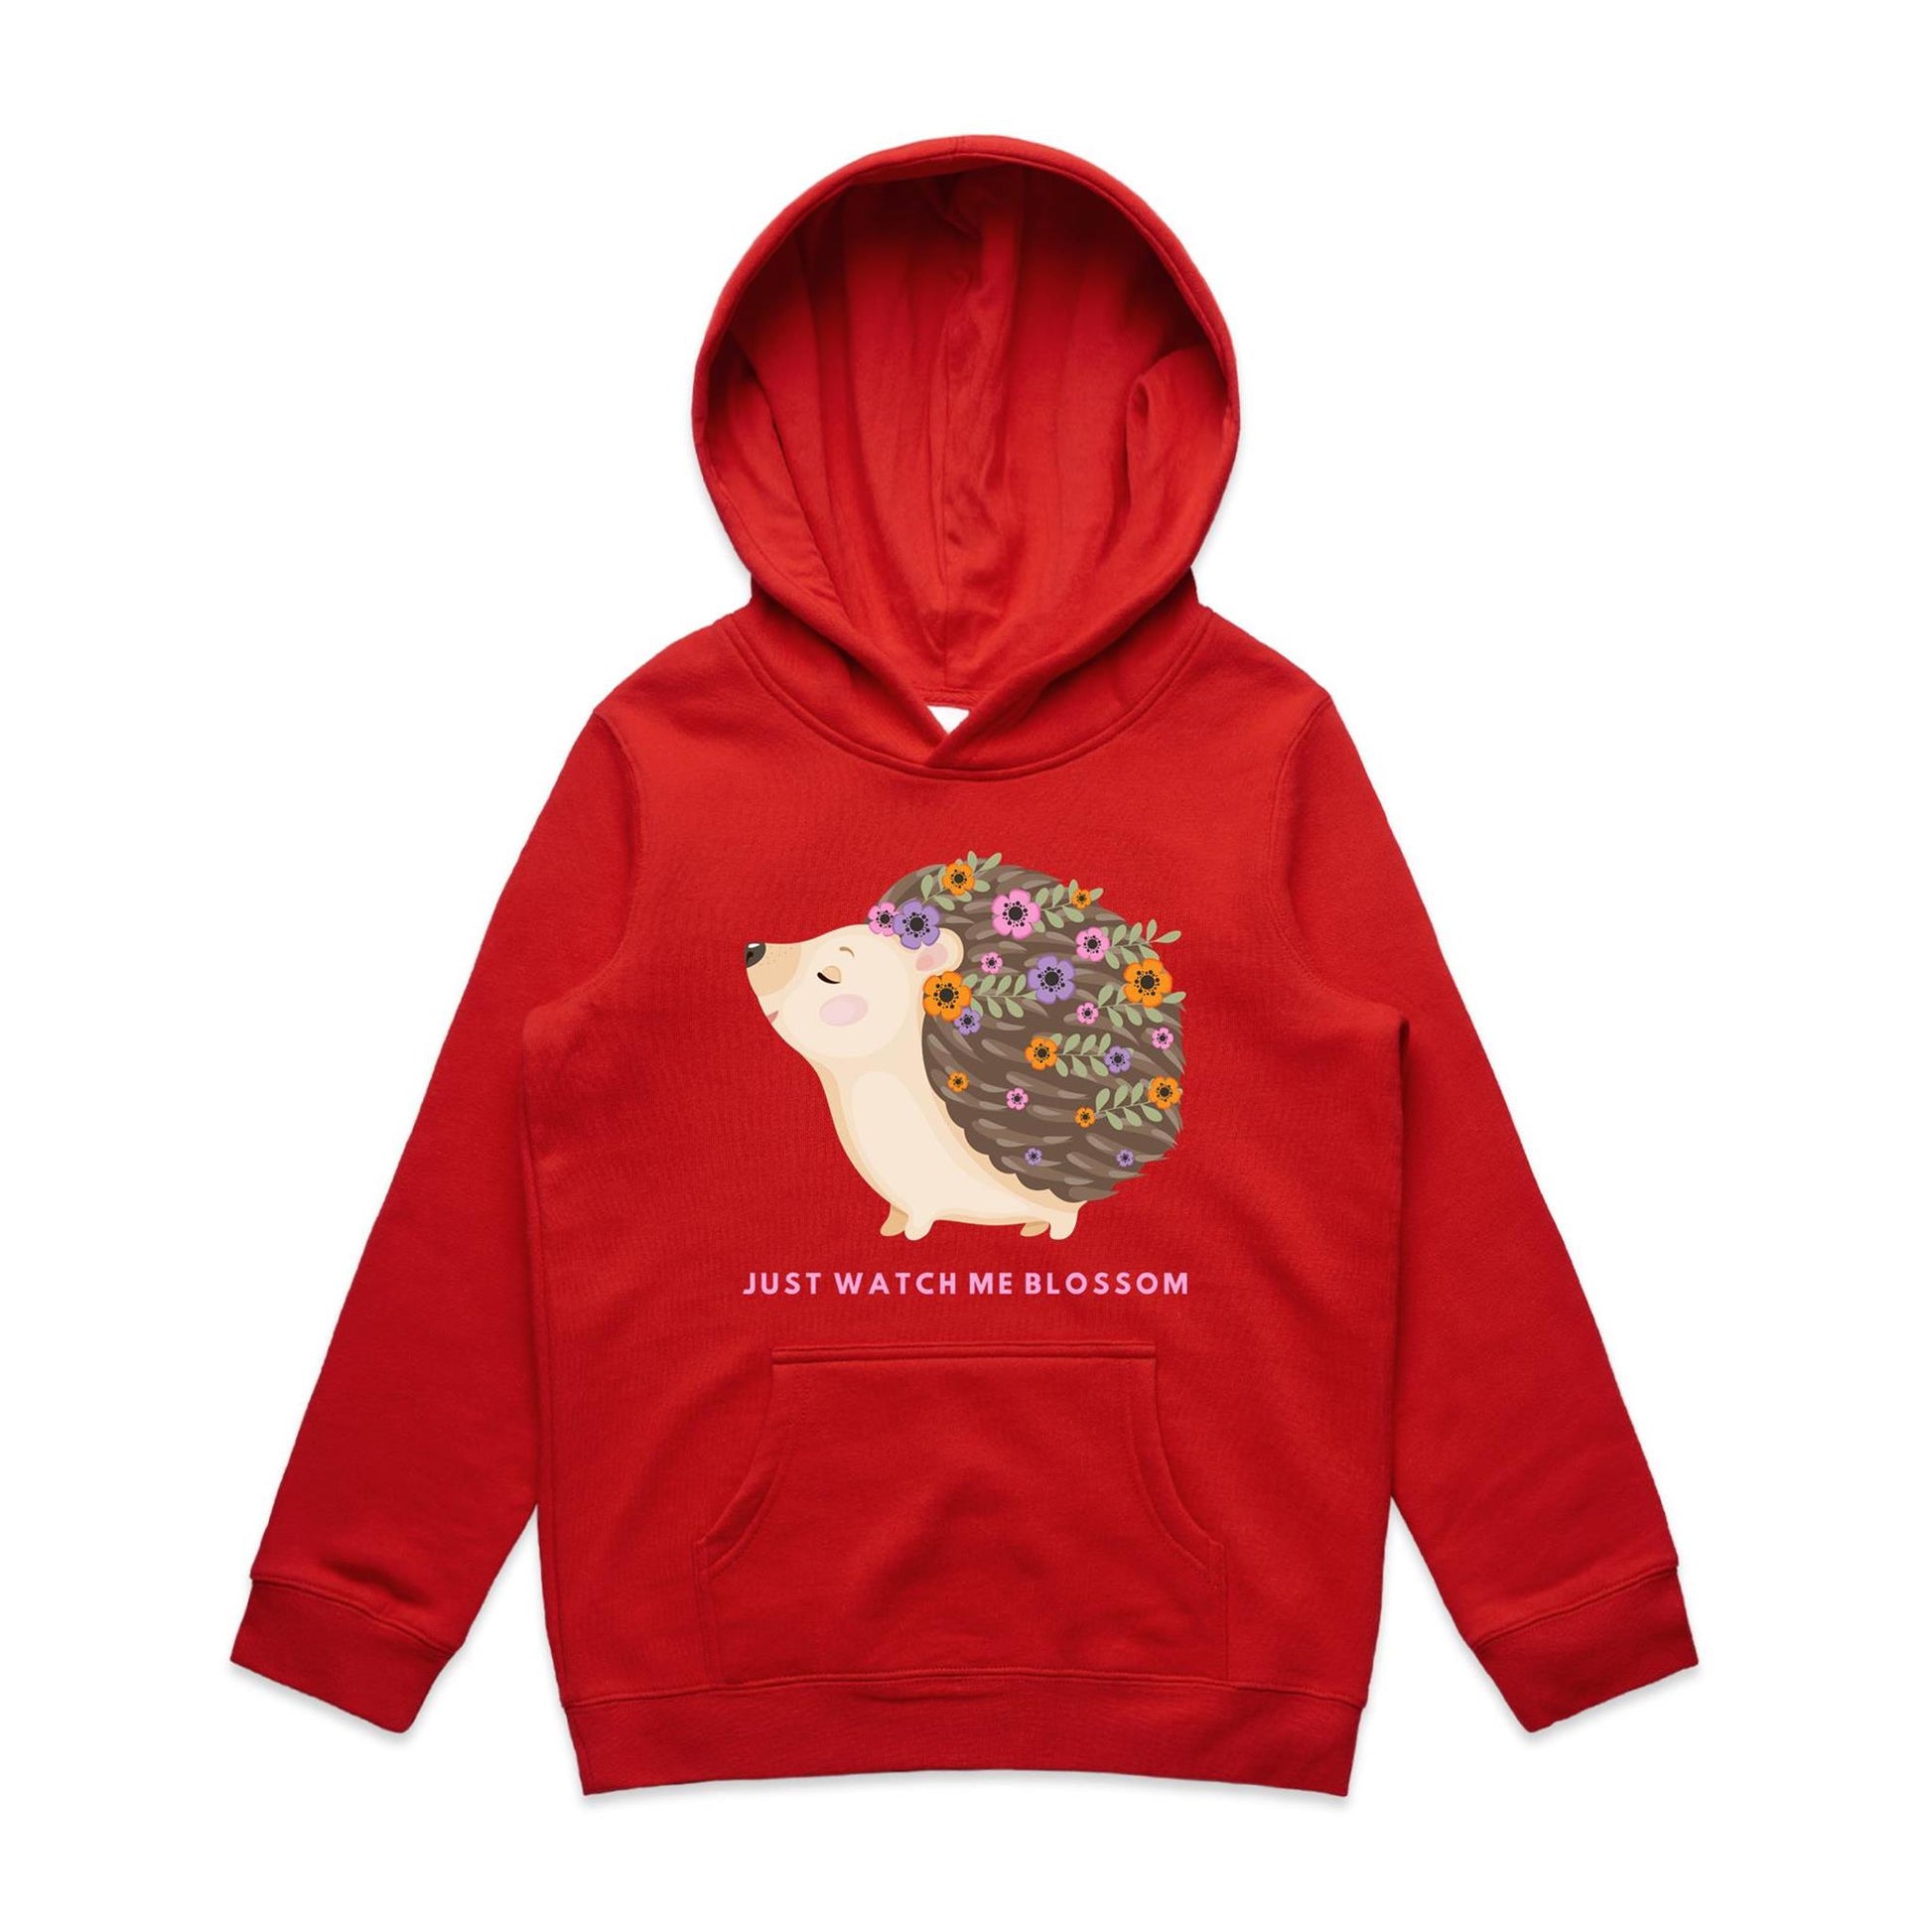 Just Watch Me Blossom - Youth Supply Hood Red Kids Hoodie animal